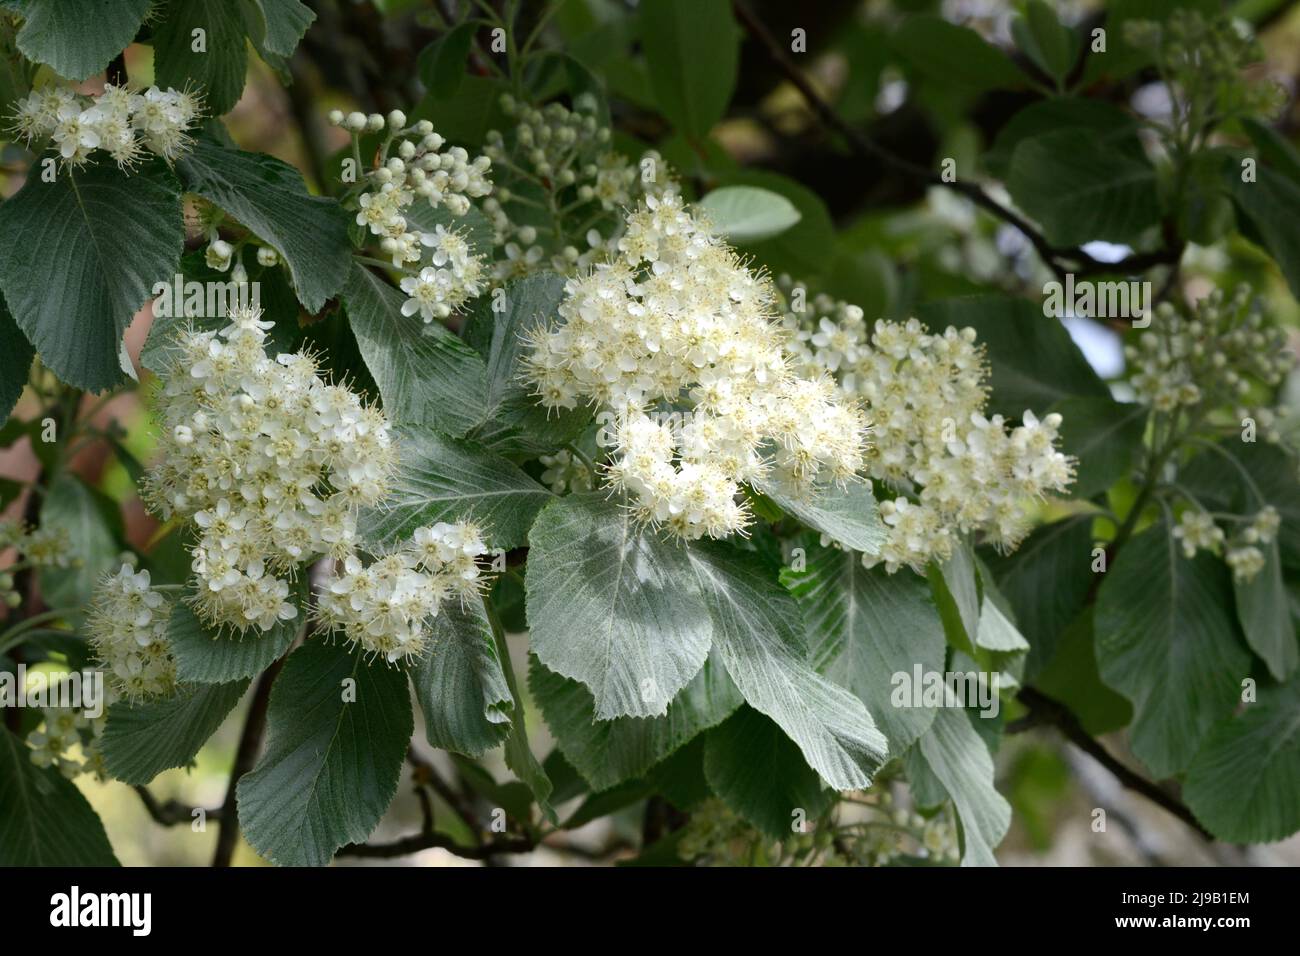 Sorbus aria Lutesens Whitebeam Chinese Mountain Ash tree silvery leaves with clusters of white flowers Stock Photo